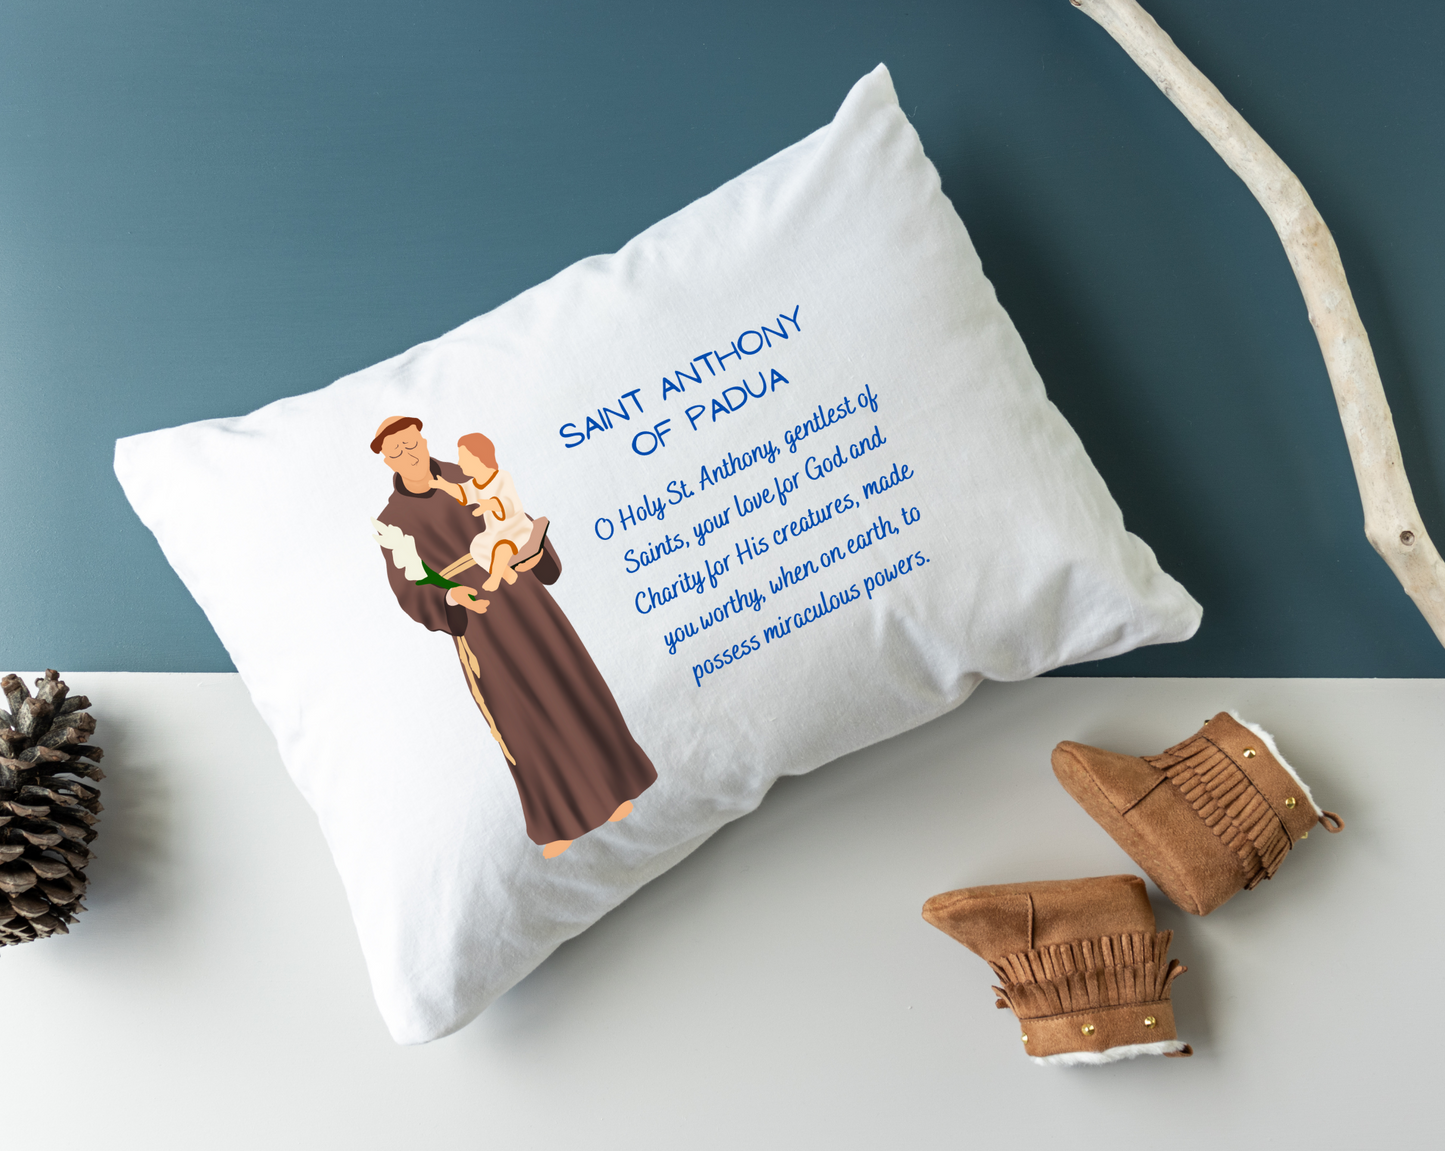 Our Lady of Guadalupe pillowcase